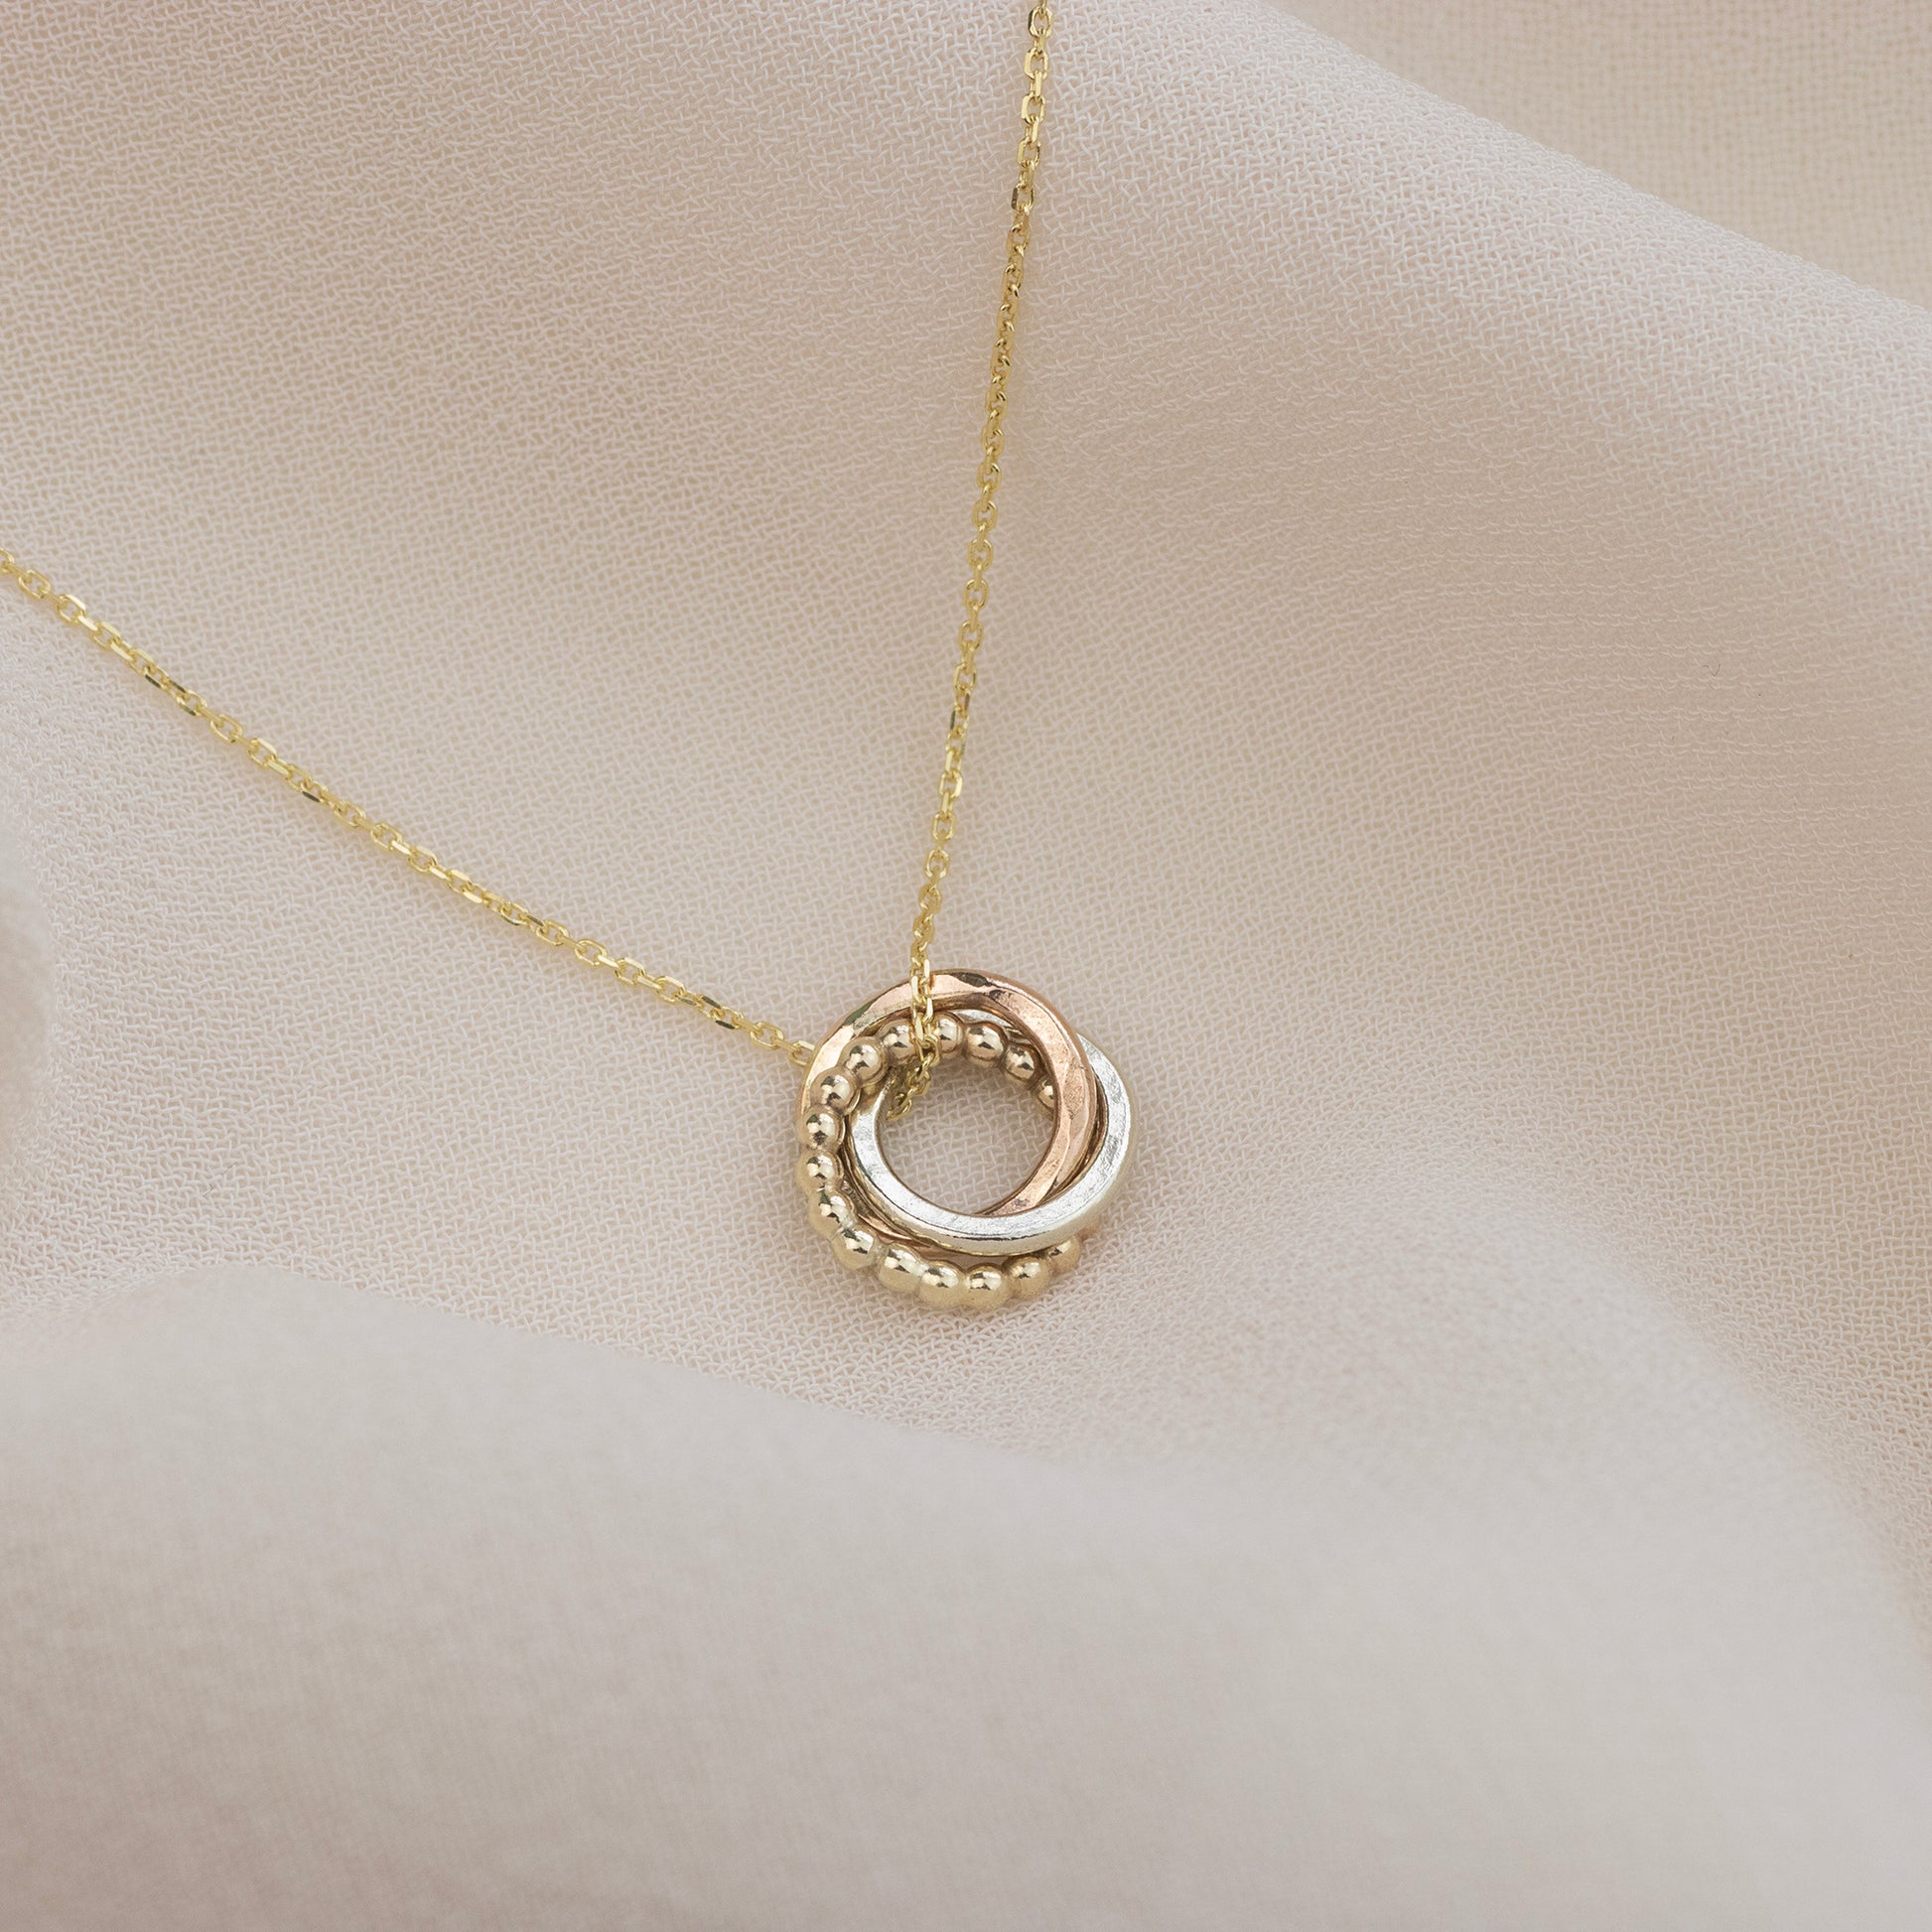 Wedding Day Gift for Bride from Mother & Father - 9kt Gold, Rose Gold & Silver Love Knot Necklace